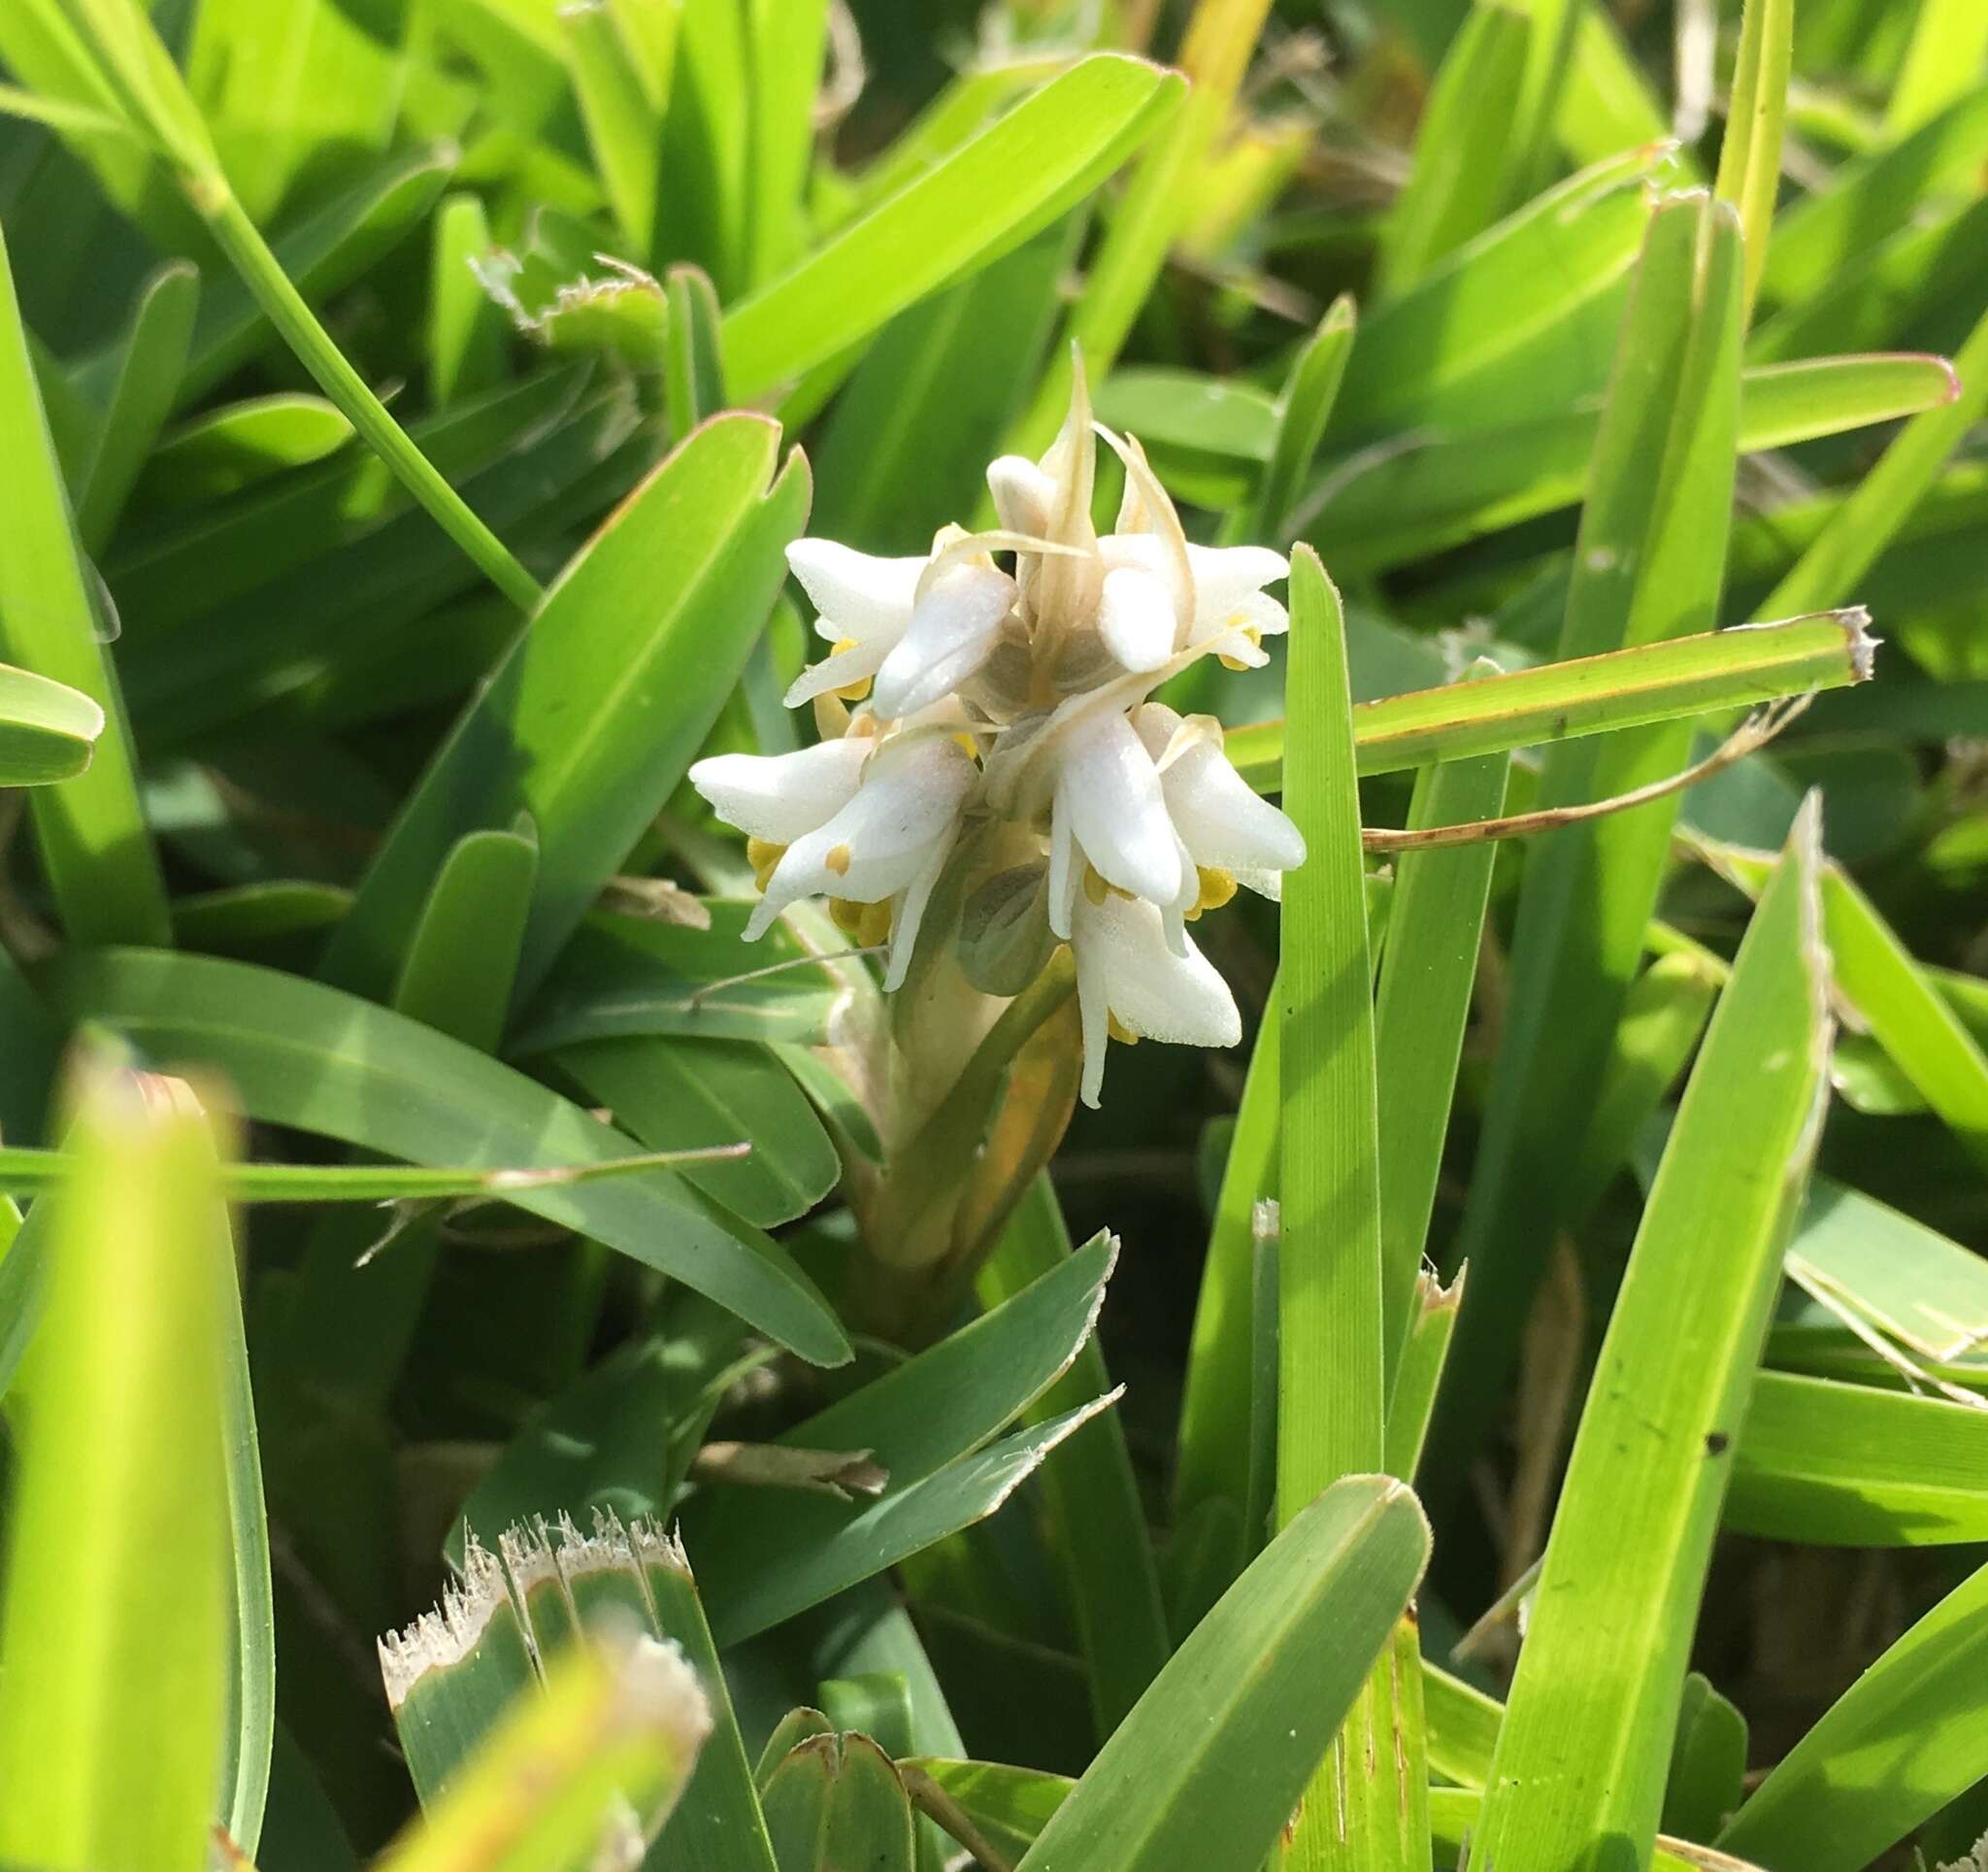 Image of Lawn orchid